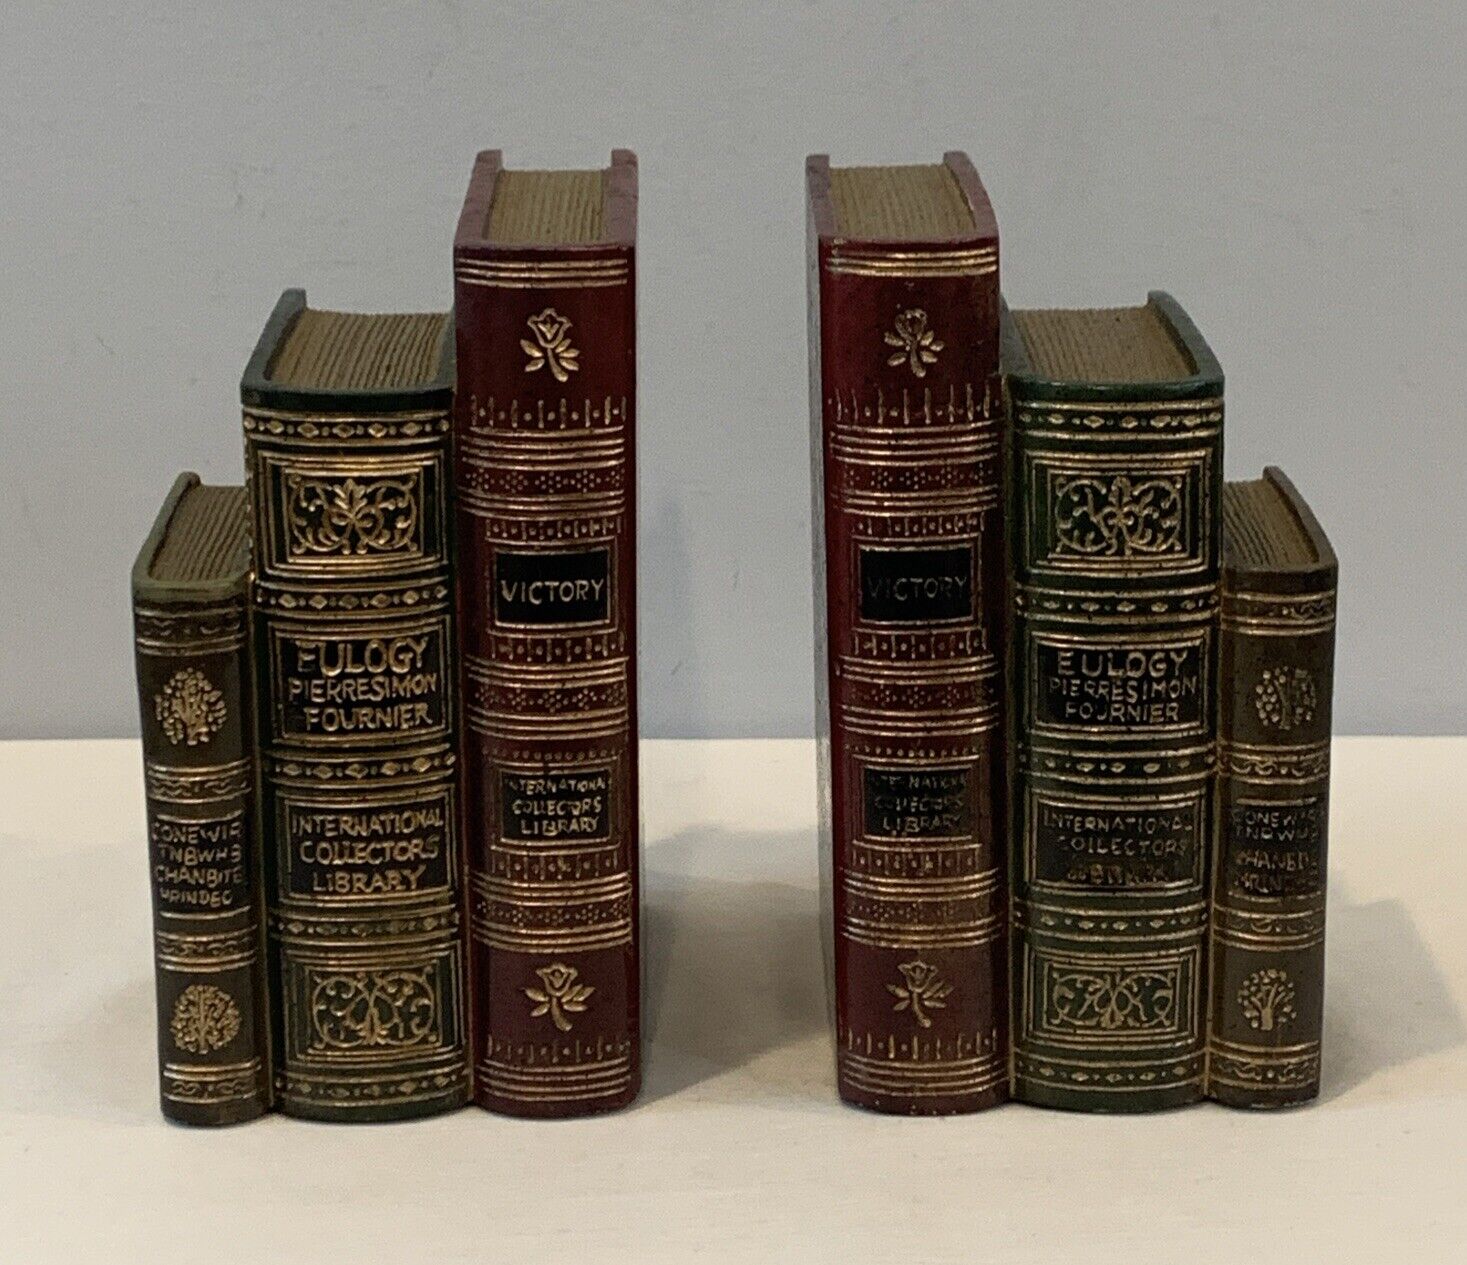 Heavy Resin Faux Antique Books Book Ends Each Weighs 3 Pounds Beautiful Set of 2